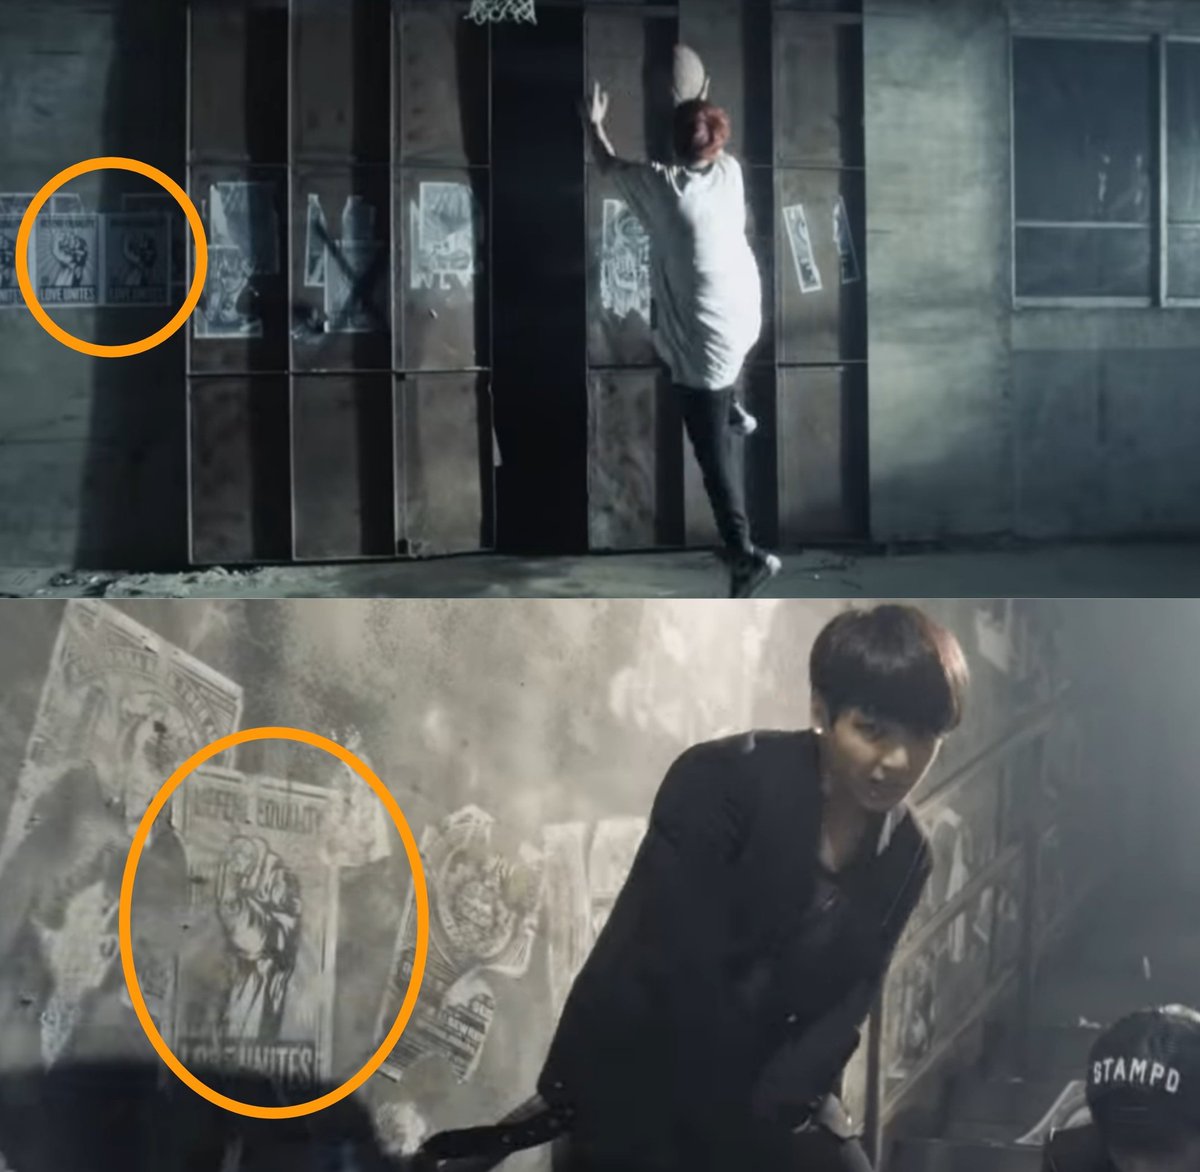 There is a really interesting poster that you can find two times in this MV. Guess when? Only in YG and JK's scene. This poster was made by Shepard Fairey to raise awareness against a law stating that "only marriage between a man and a woman is valid or recognized in California".